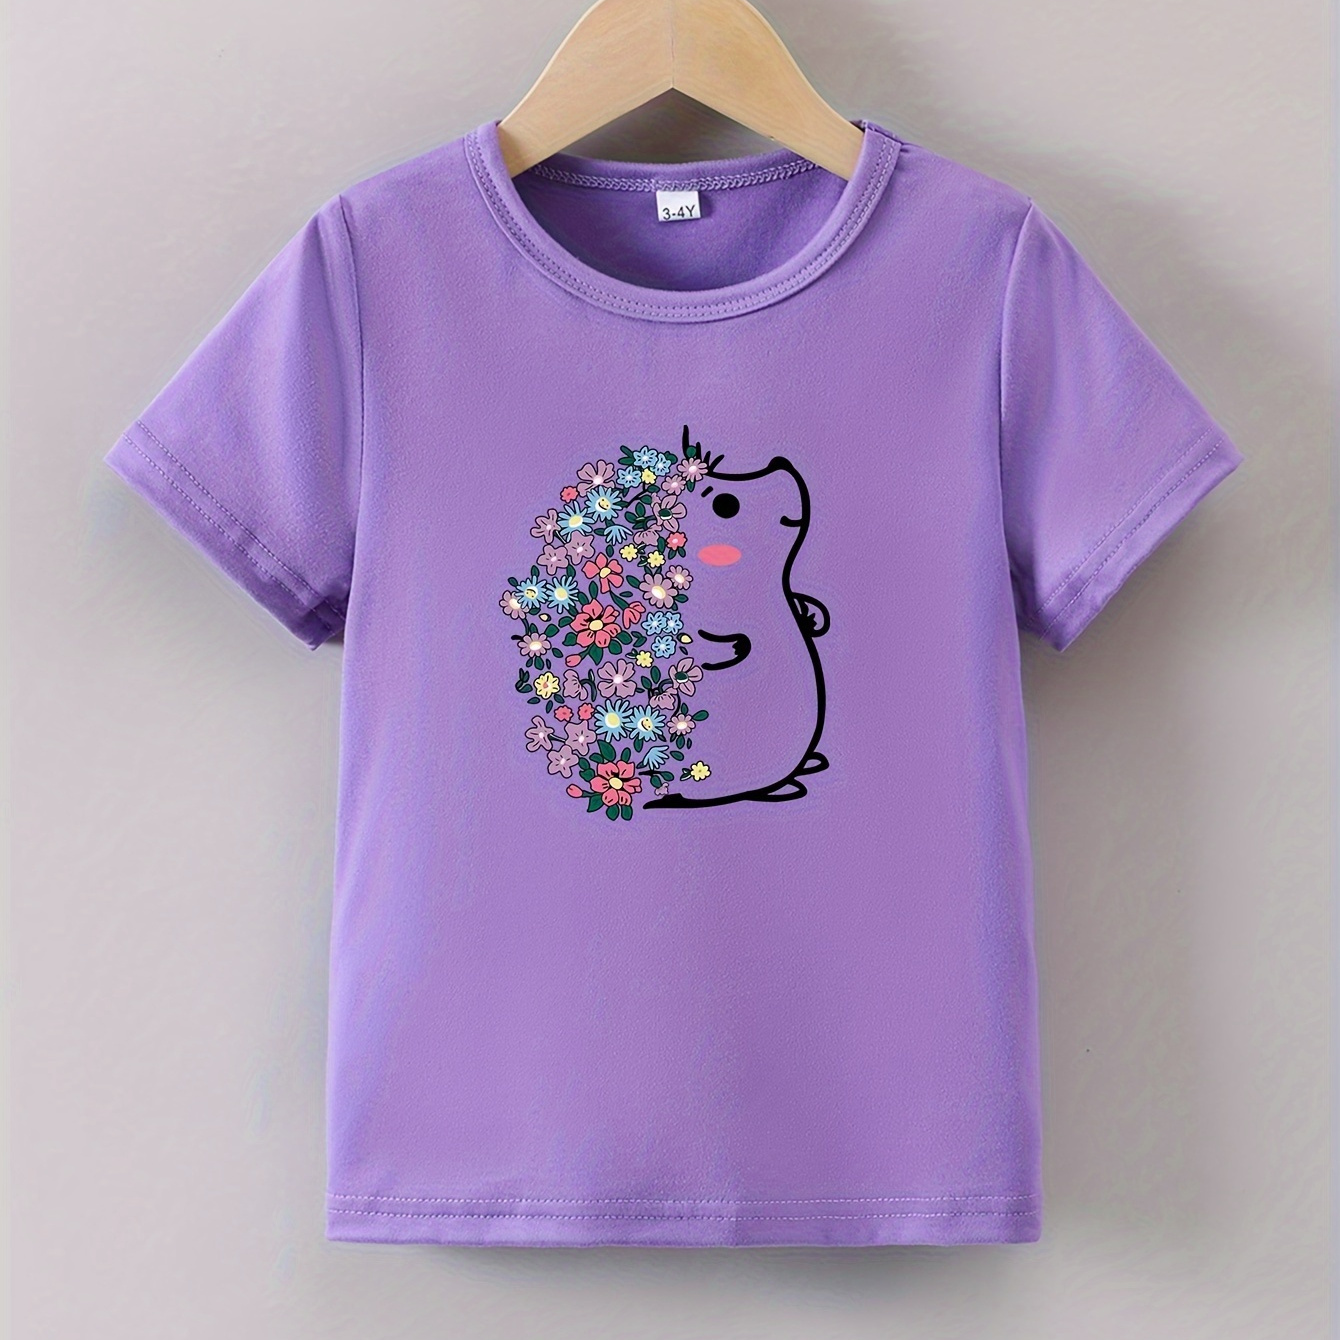 

Cartoon Floral Hedgehog Graphic Print For Girls, Casual Crew Neck Short Sleeved T-shirt, Comfy Top For Summer